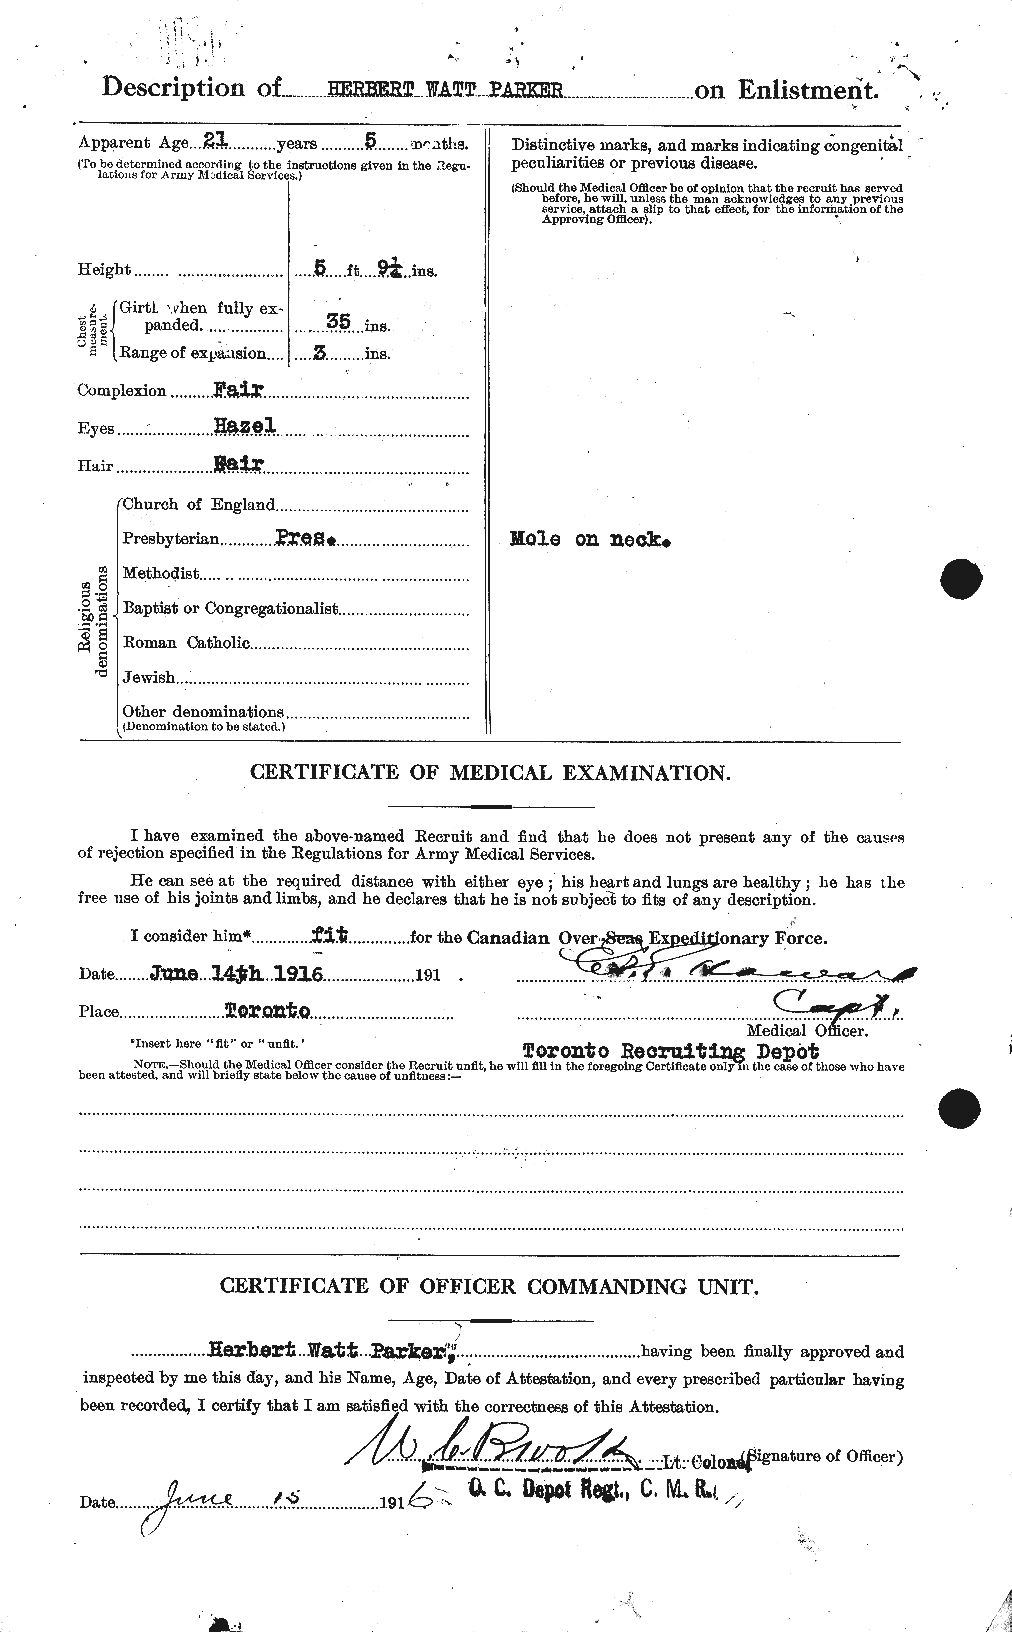 Personnel Records of the First World War - CEF 565364b